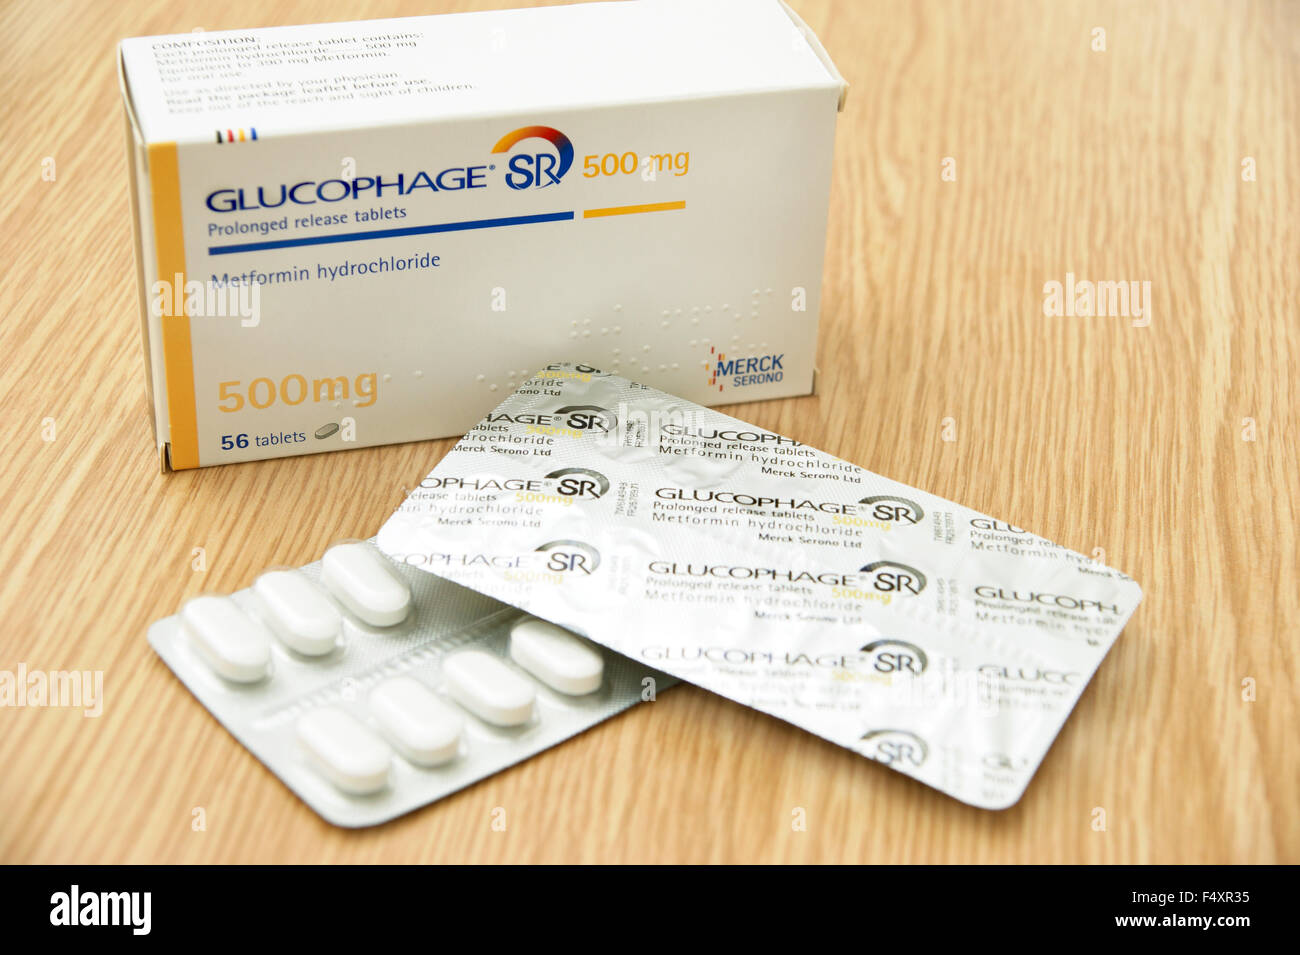 Glucophage Metformin hydrochloride prolonged released tablets - treating diabetes by regulating the level of sugar in the blood Stock Photo